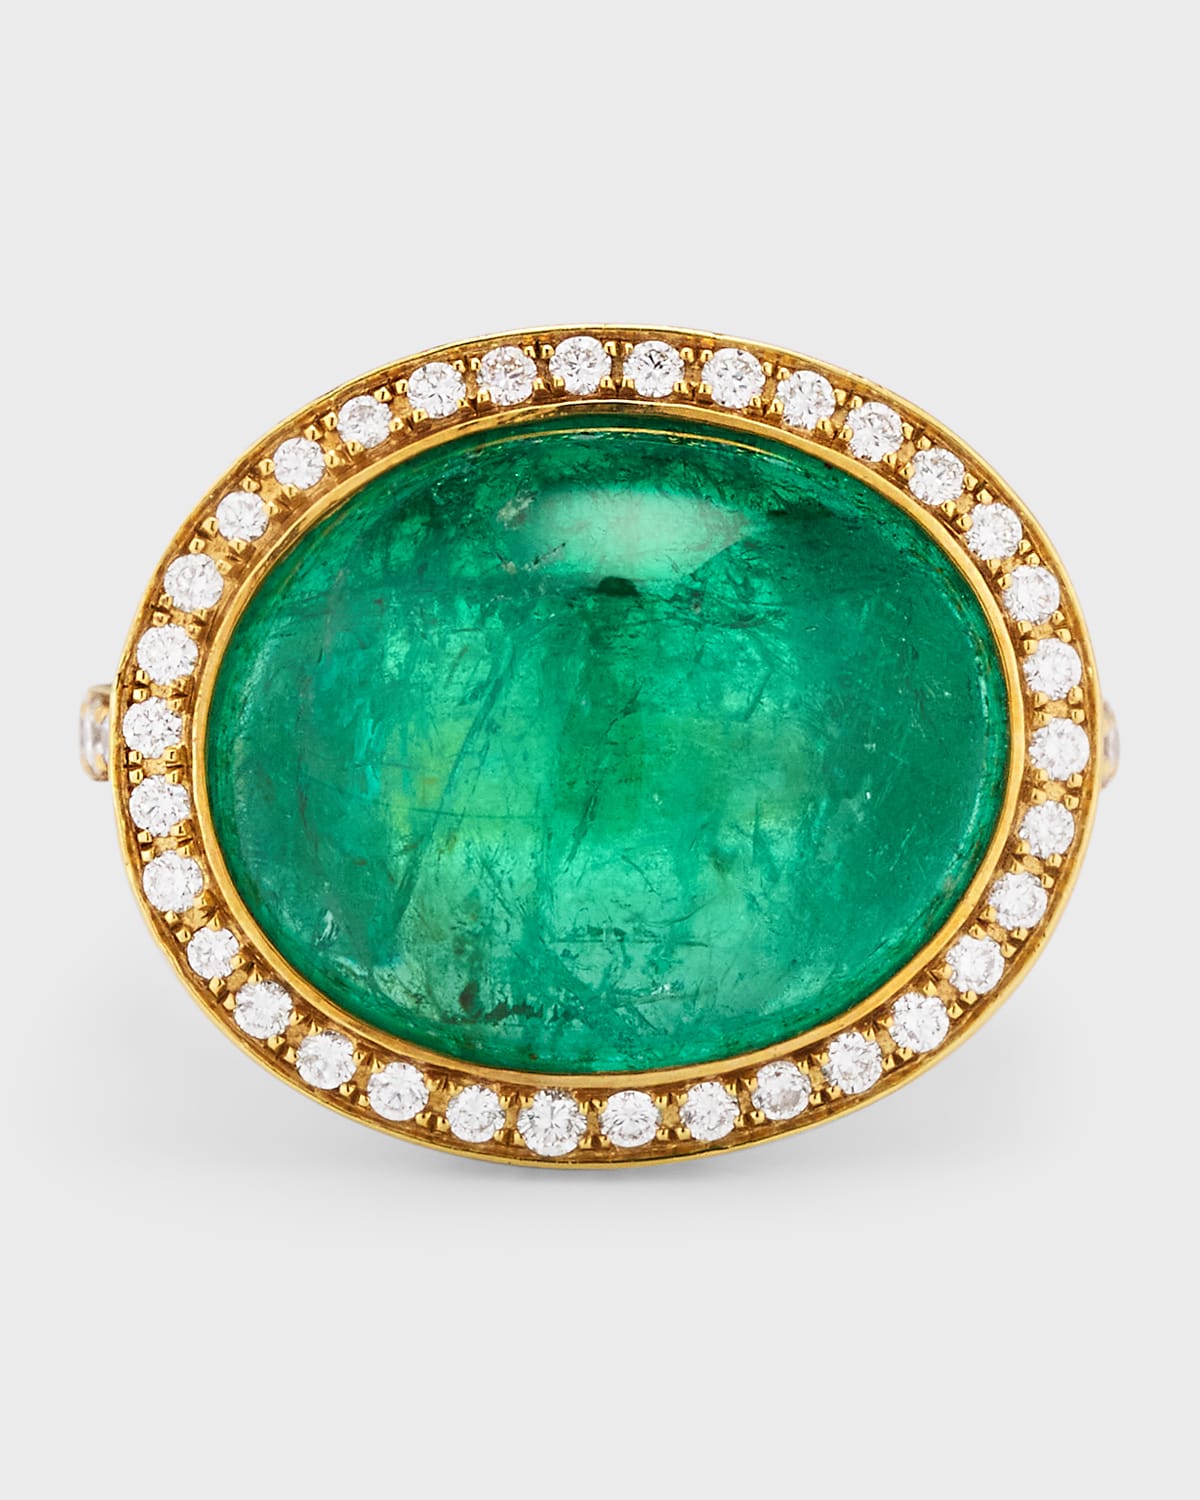 18K Yellow Gold Emerald Cabochon Ring with Diamonds